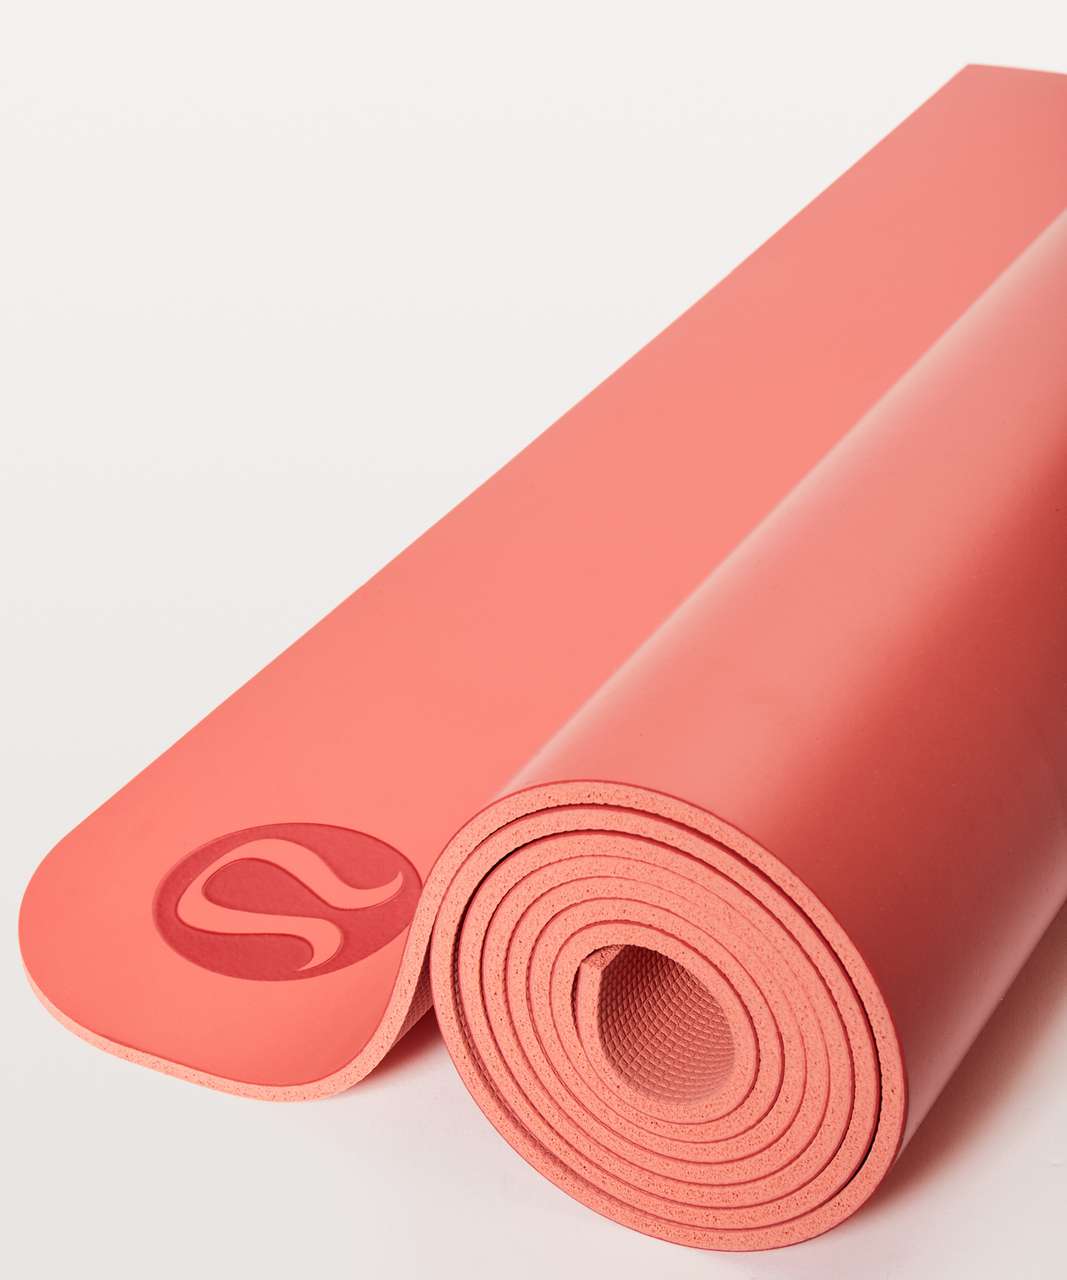 Lululemon The Reversible Mat 5mm - Cape Red / Sunny Coral